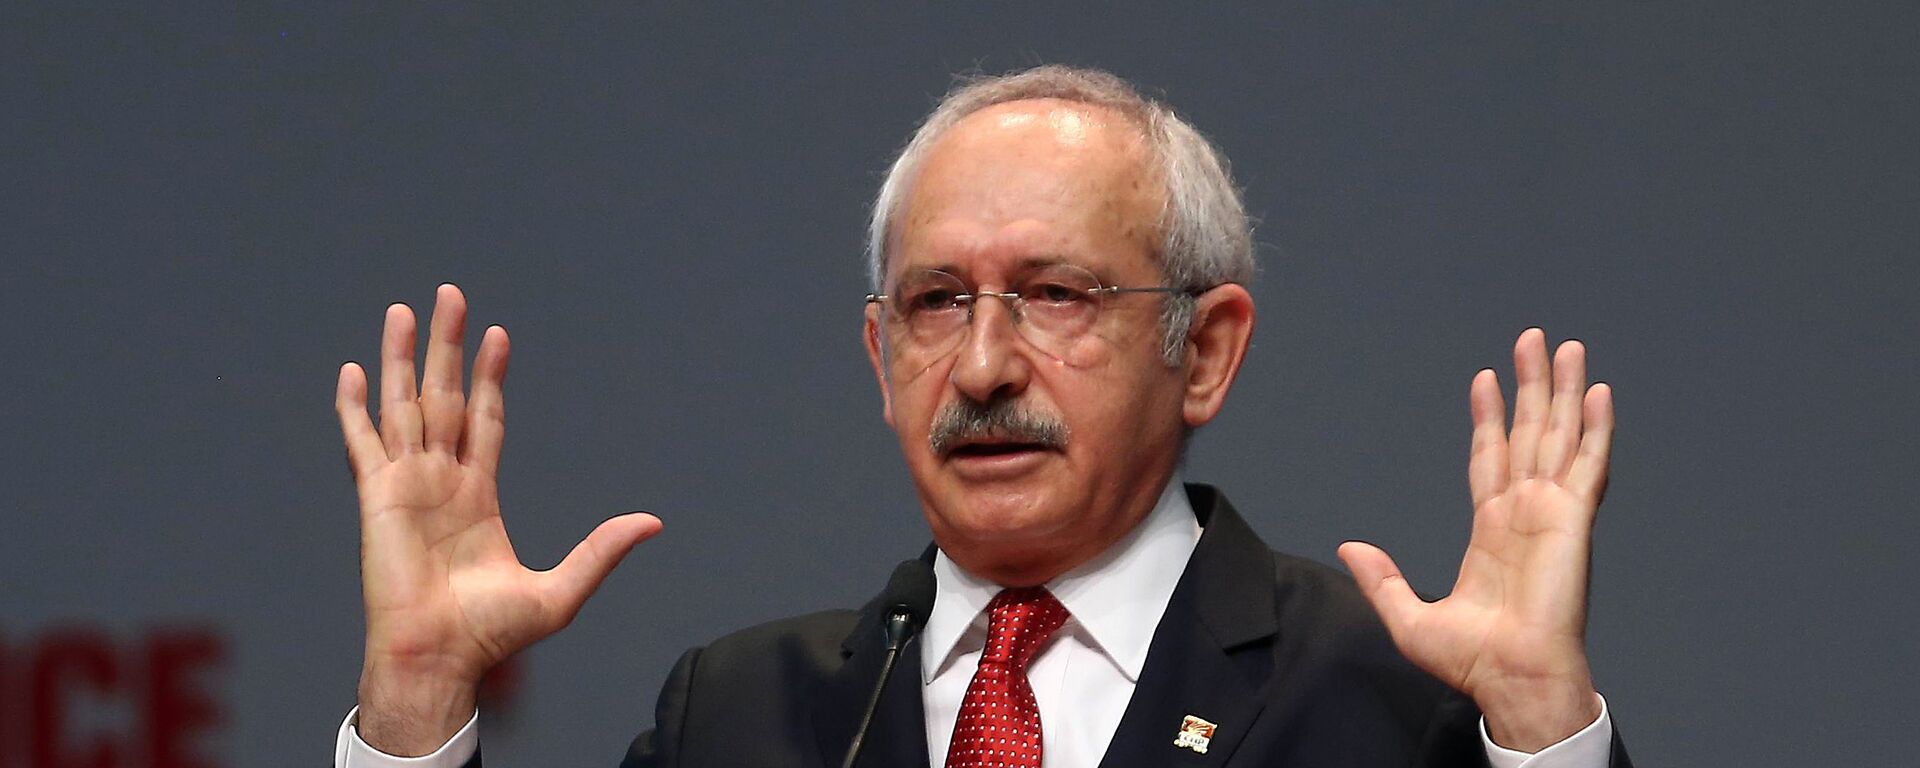 Kemal Kilicdaroglu, leader of Turkey's main opposition Republican People's Party (CHP), delivers a speech during a party meeting in Ankara on September 30, 2015 - Sputnik International, 1920, 13.05.2023